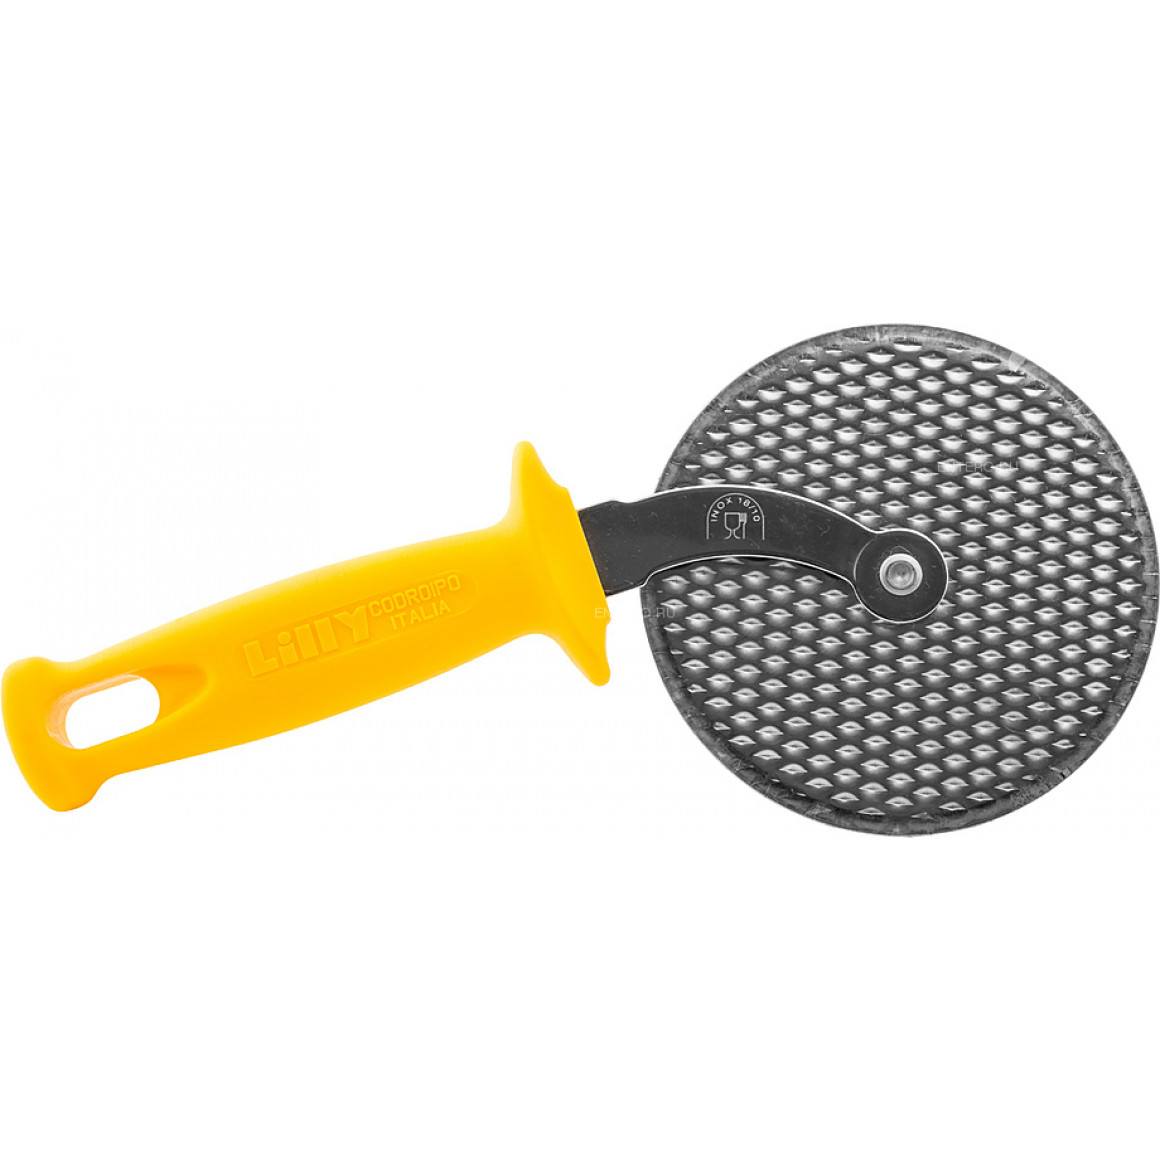 Stainless steel anti-stick pizza-cutting wheel